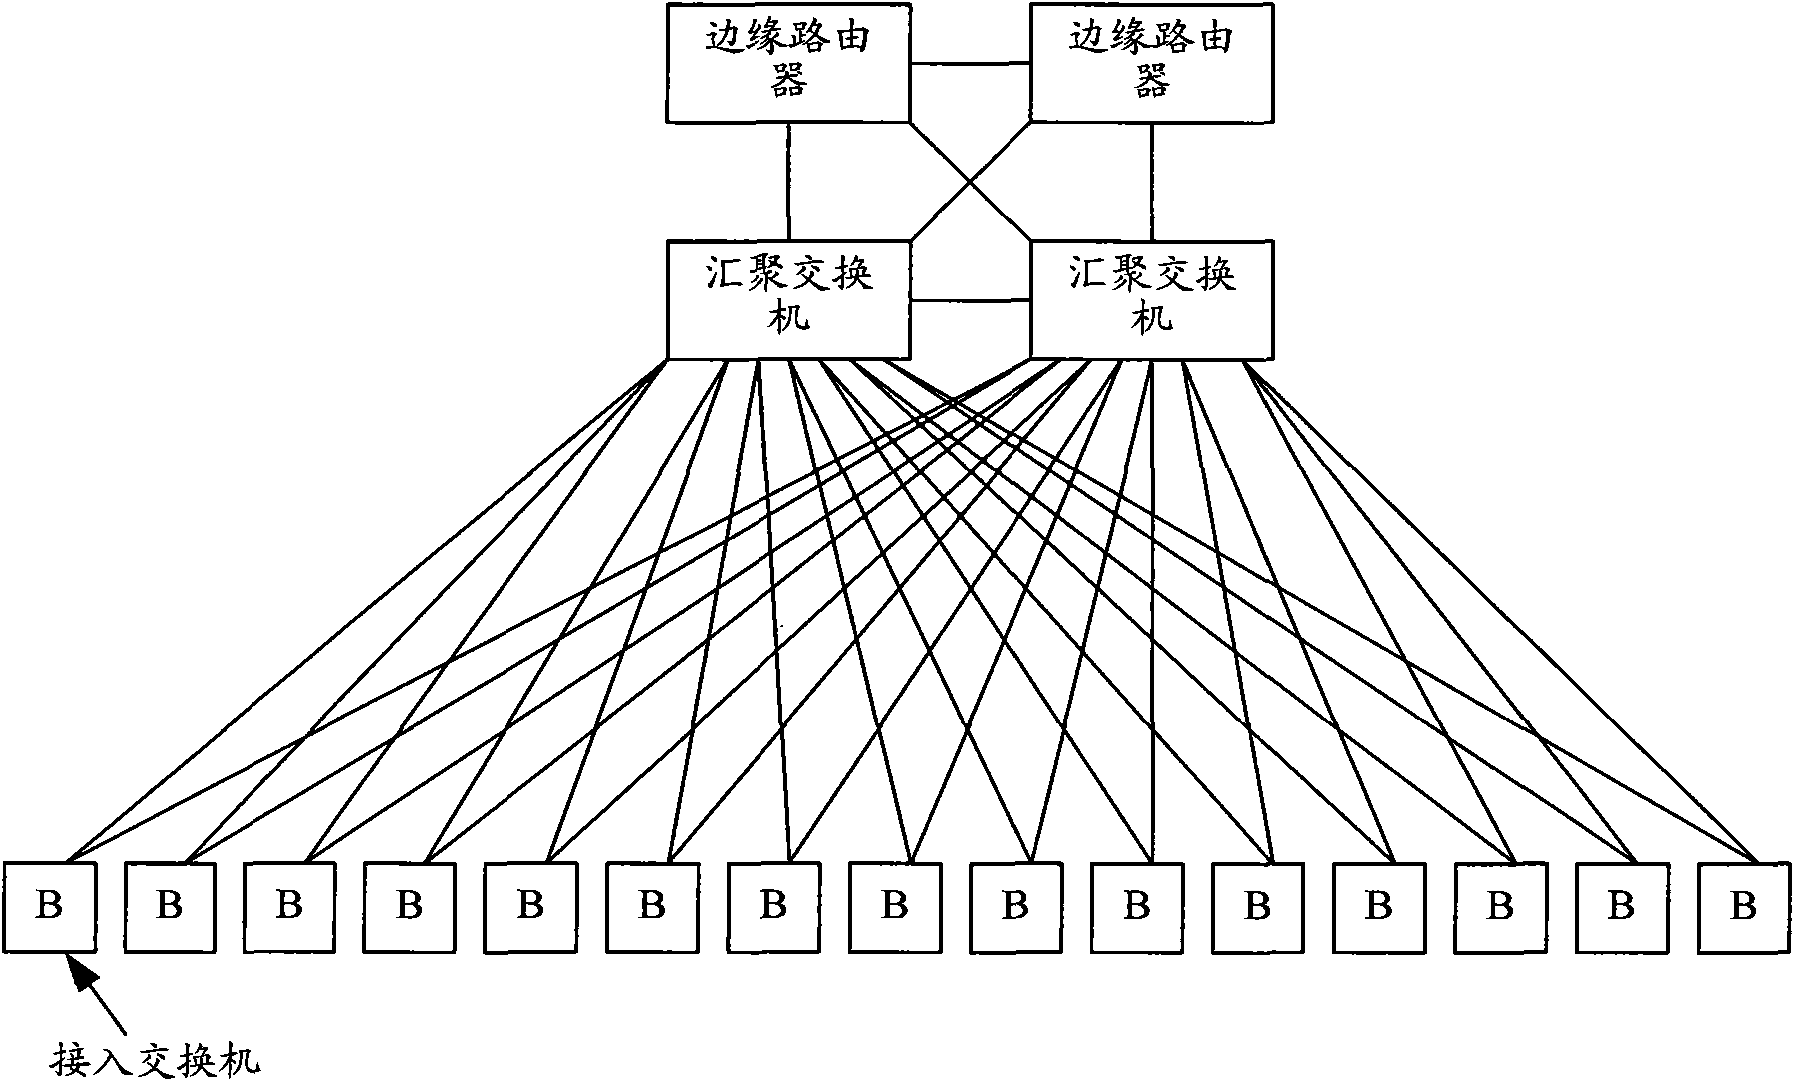 Interconnection method of transparent interconnection network of lots of links in different places and operator edge device